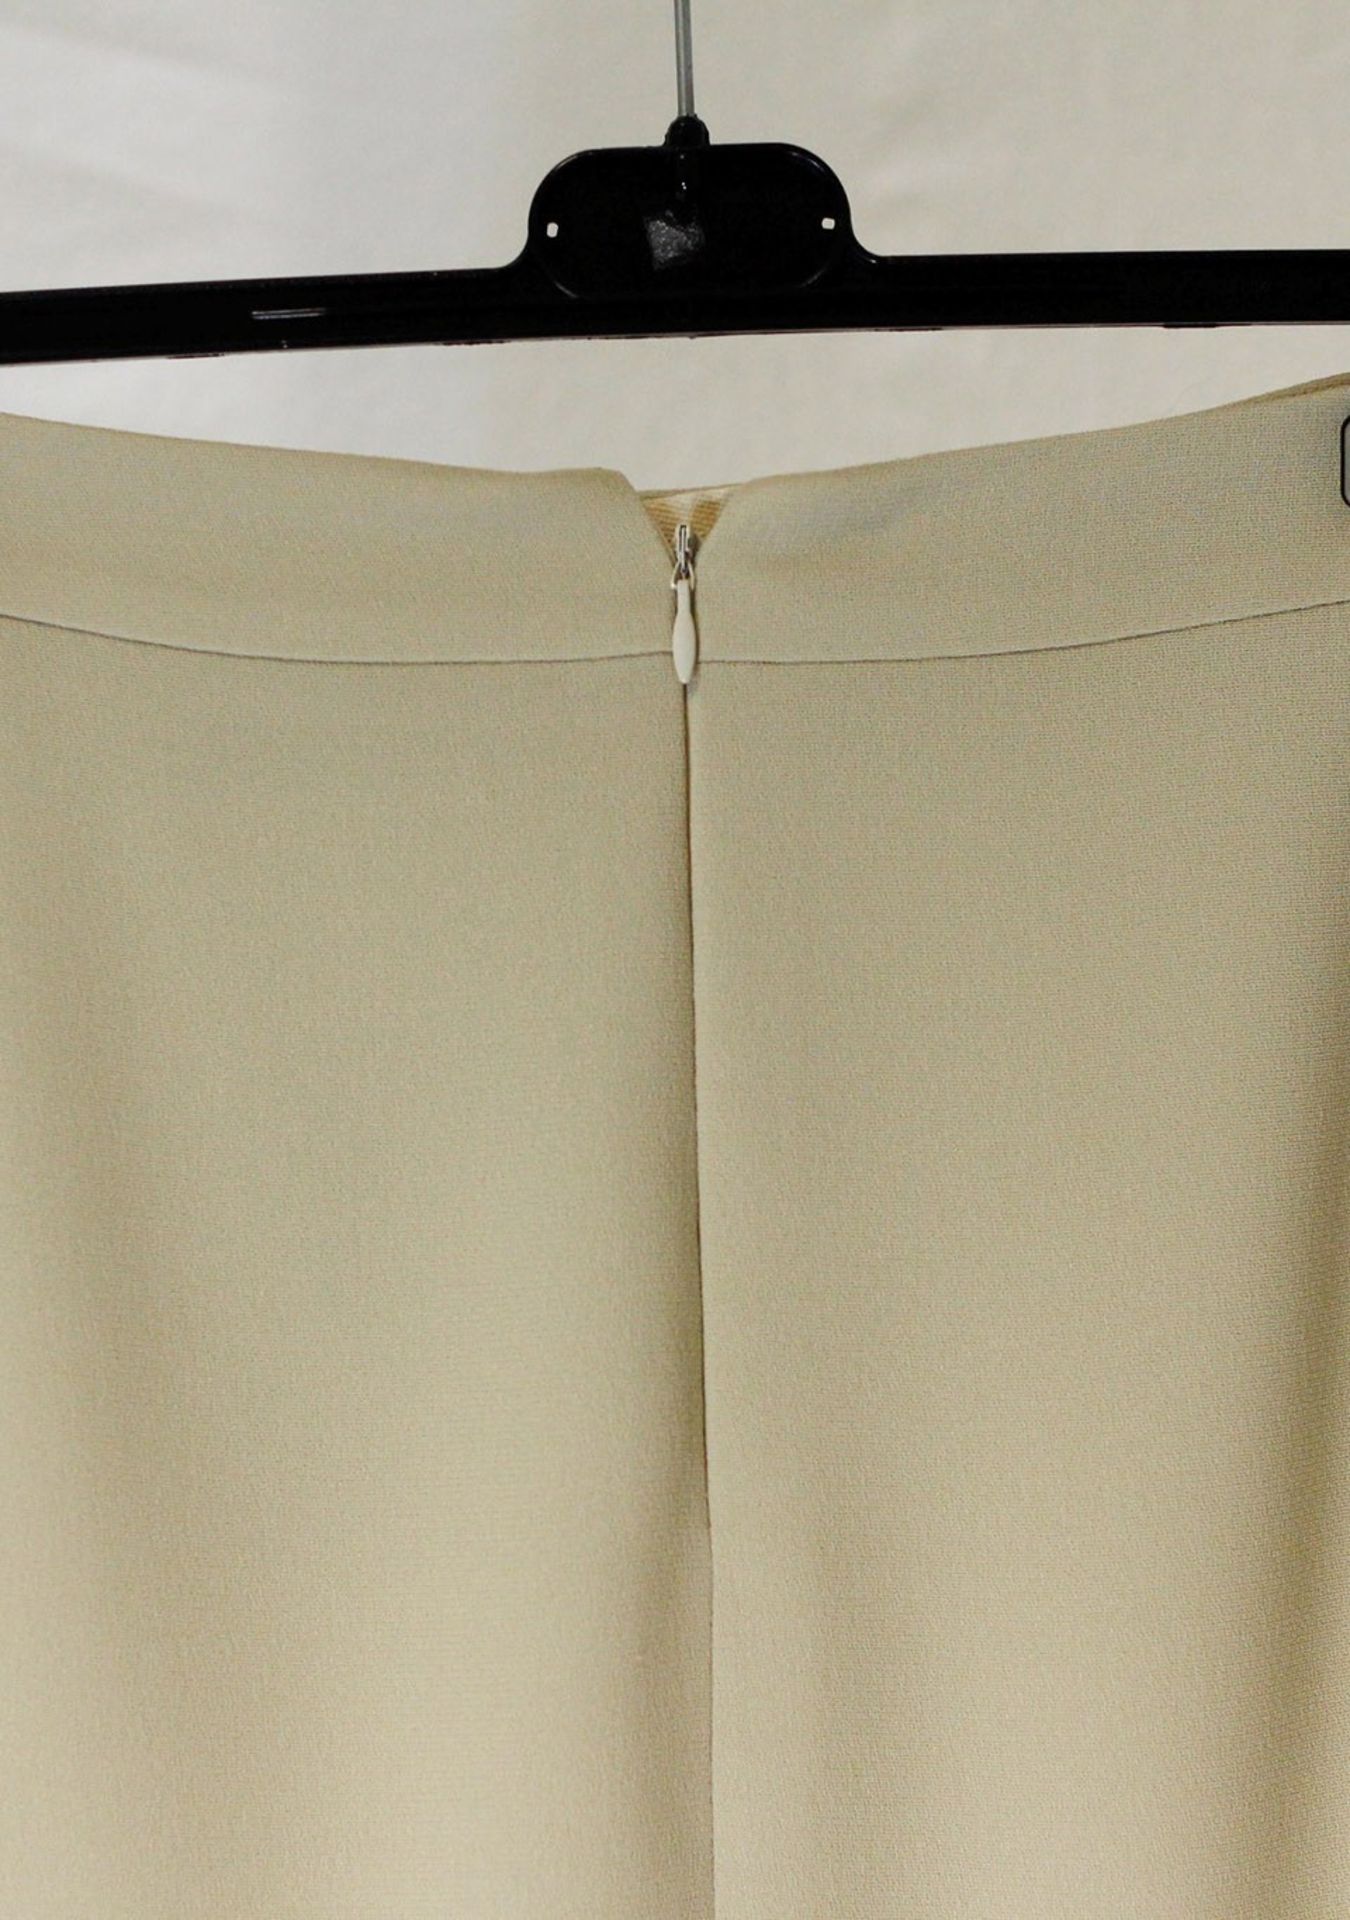 1 x Anne Belin Pistachio Skirt - Size: 16 - Material: 100% Polyester - From a High End Clothing - Image 2 of 11